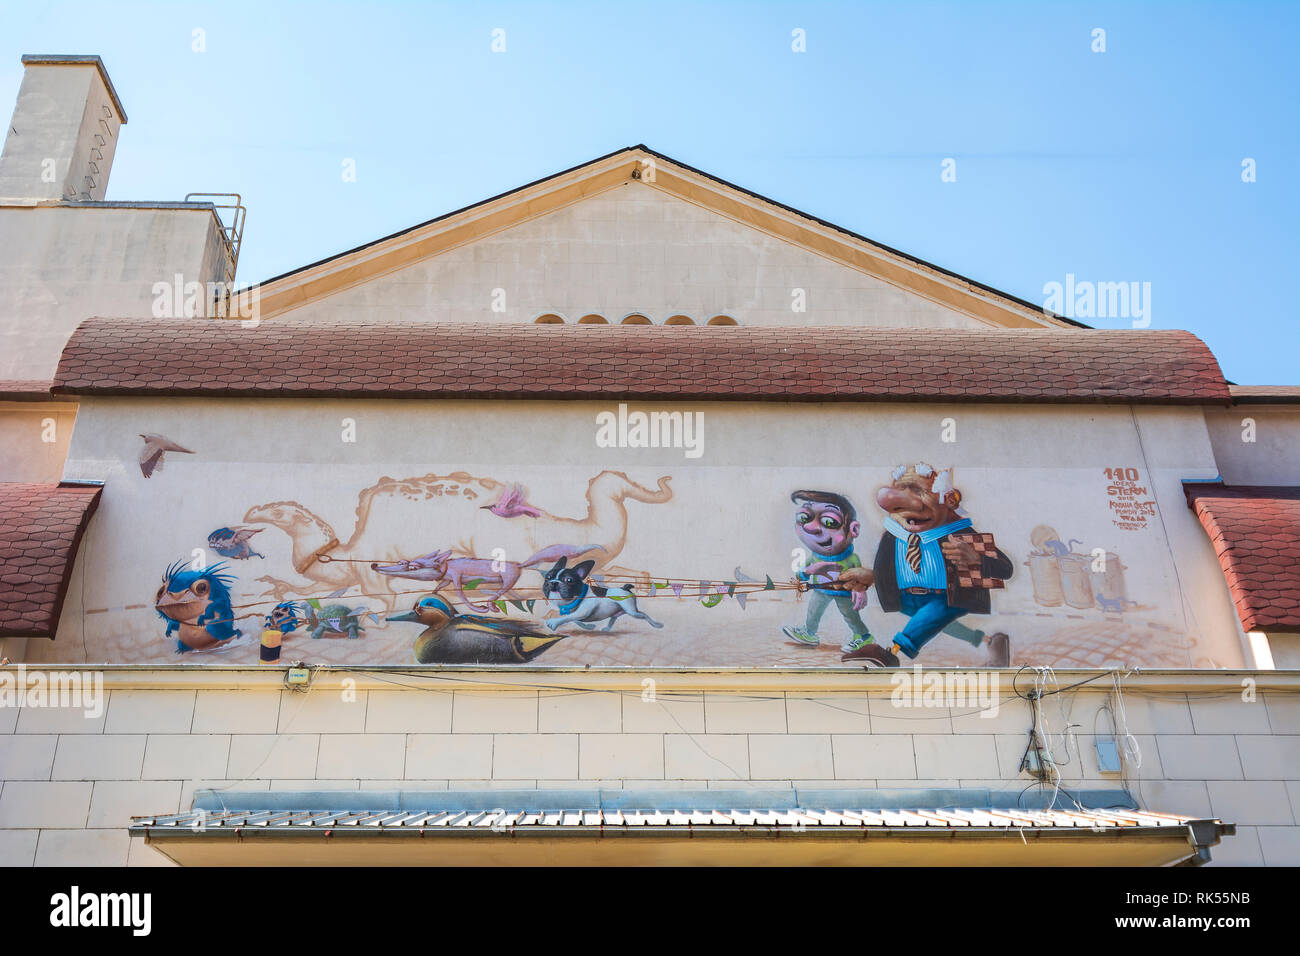 Graffiti on the wall in Plovdiv city, Bulgaria Stock Photo